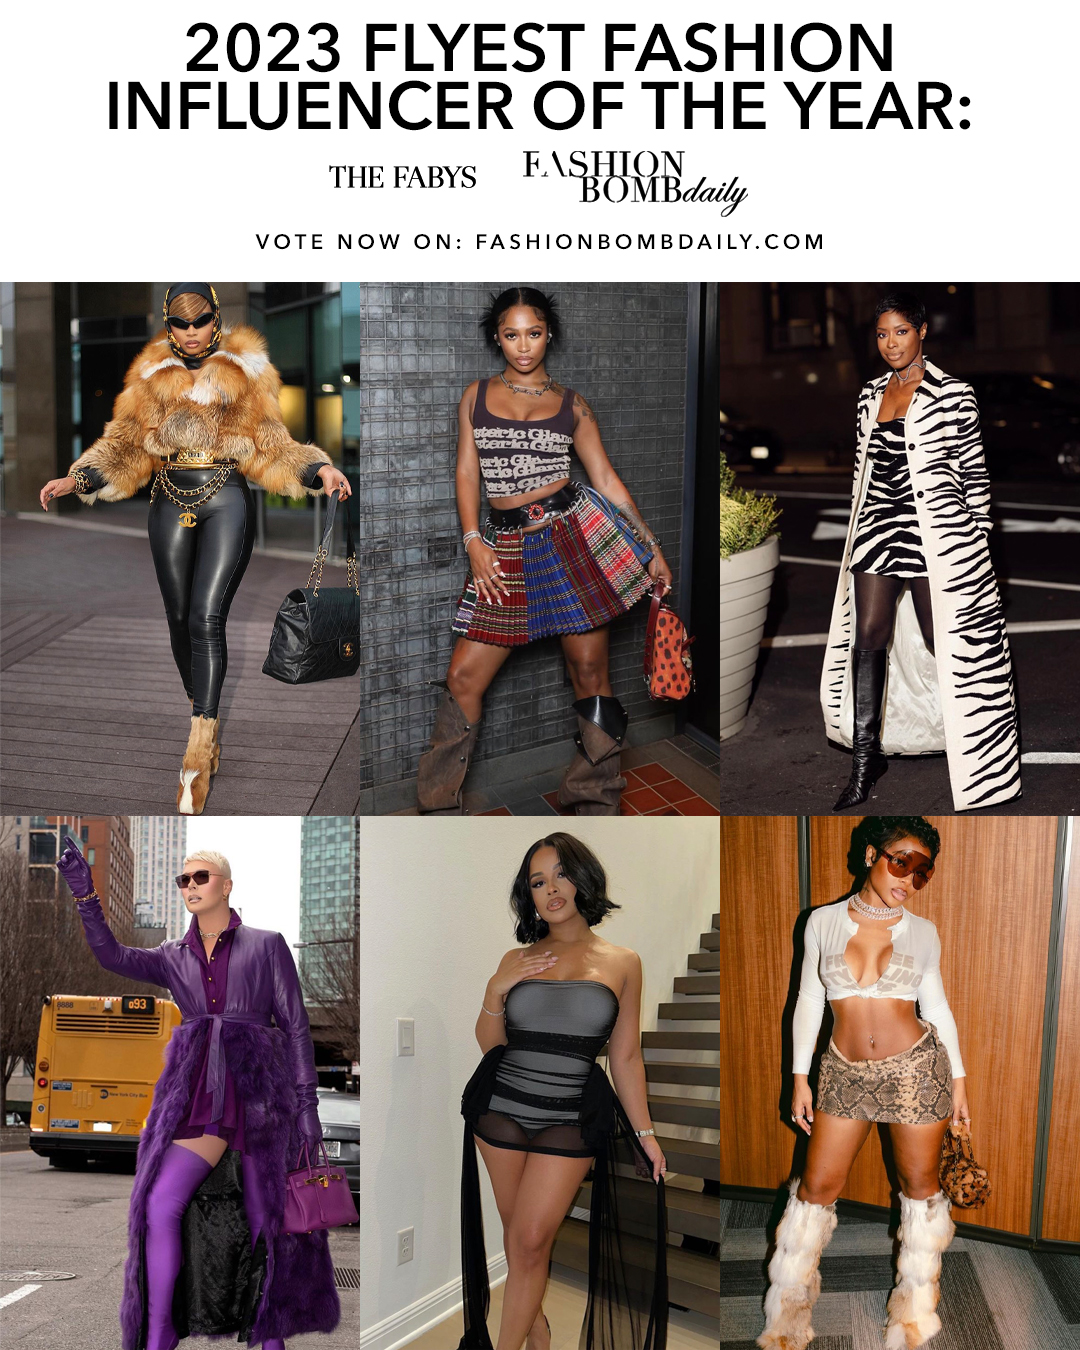 Vote for Most Flyest Fashion Influencer Including Alonzo Arnold, Jayda Cheaves, Taina Williams & More! – Fashion Bomb Daily